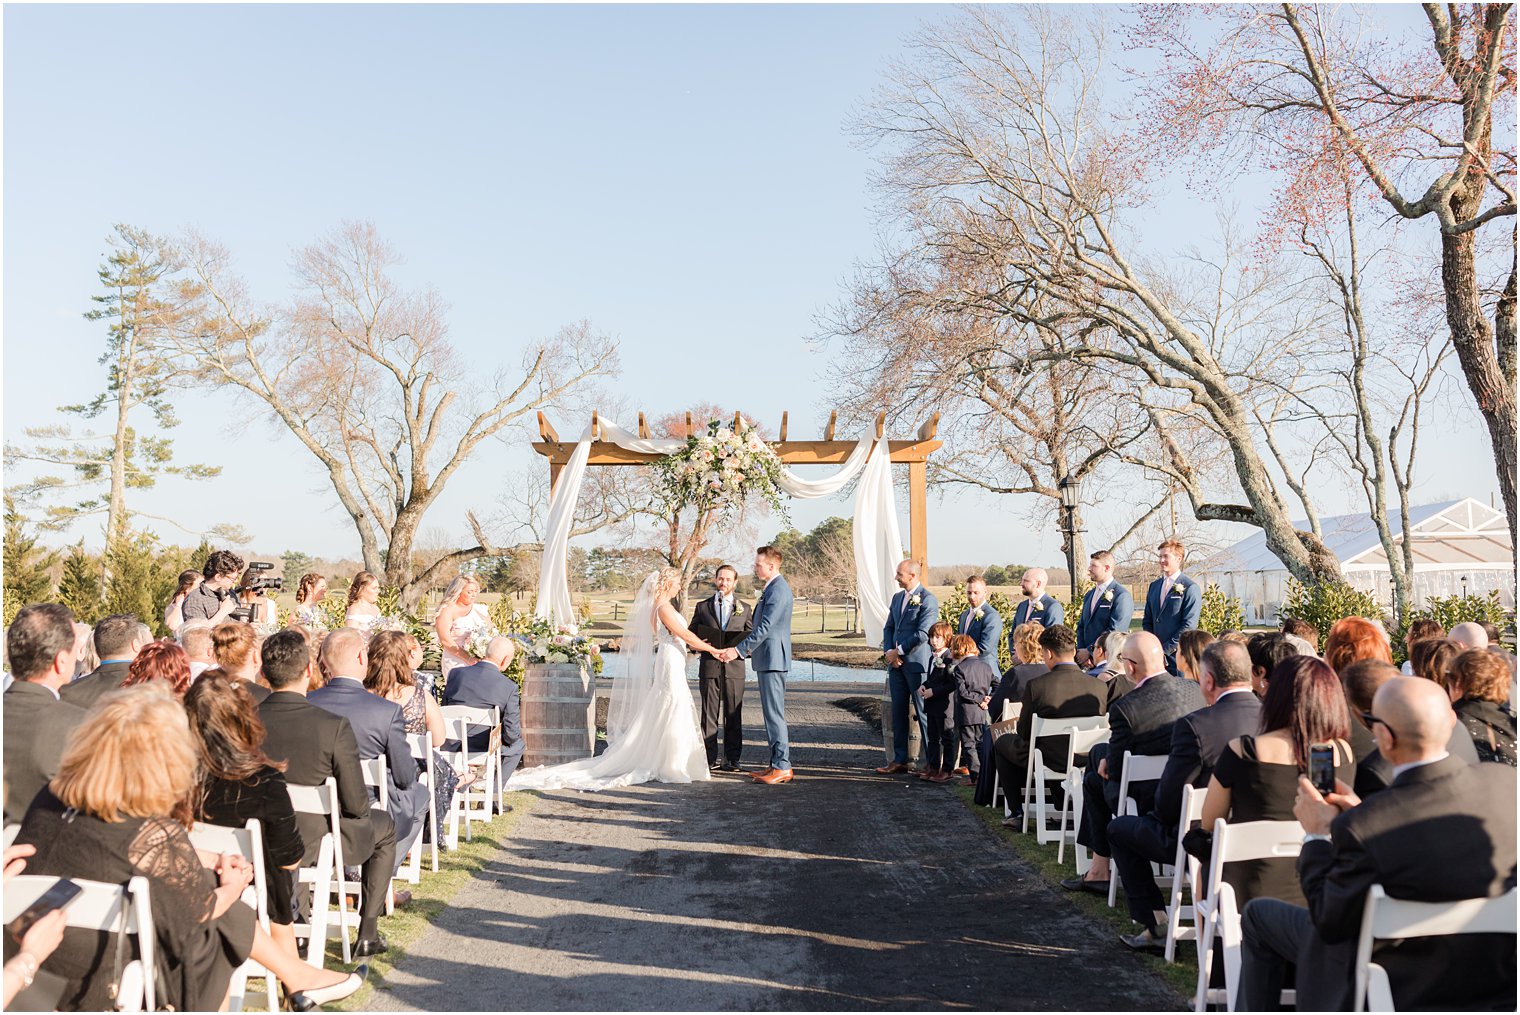 exchange of vows during outdoor ceremony at Renault Winery in Egg Harbor Township, NJ